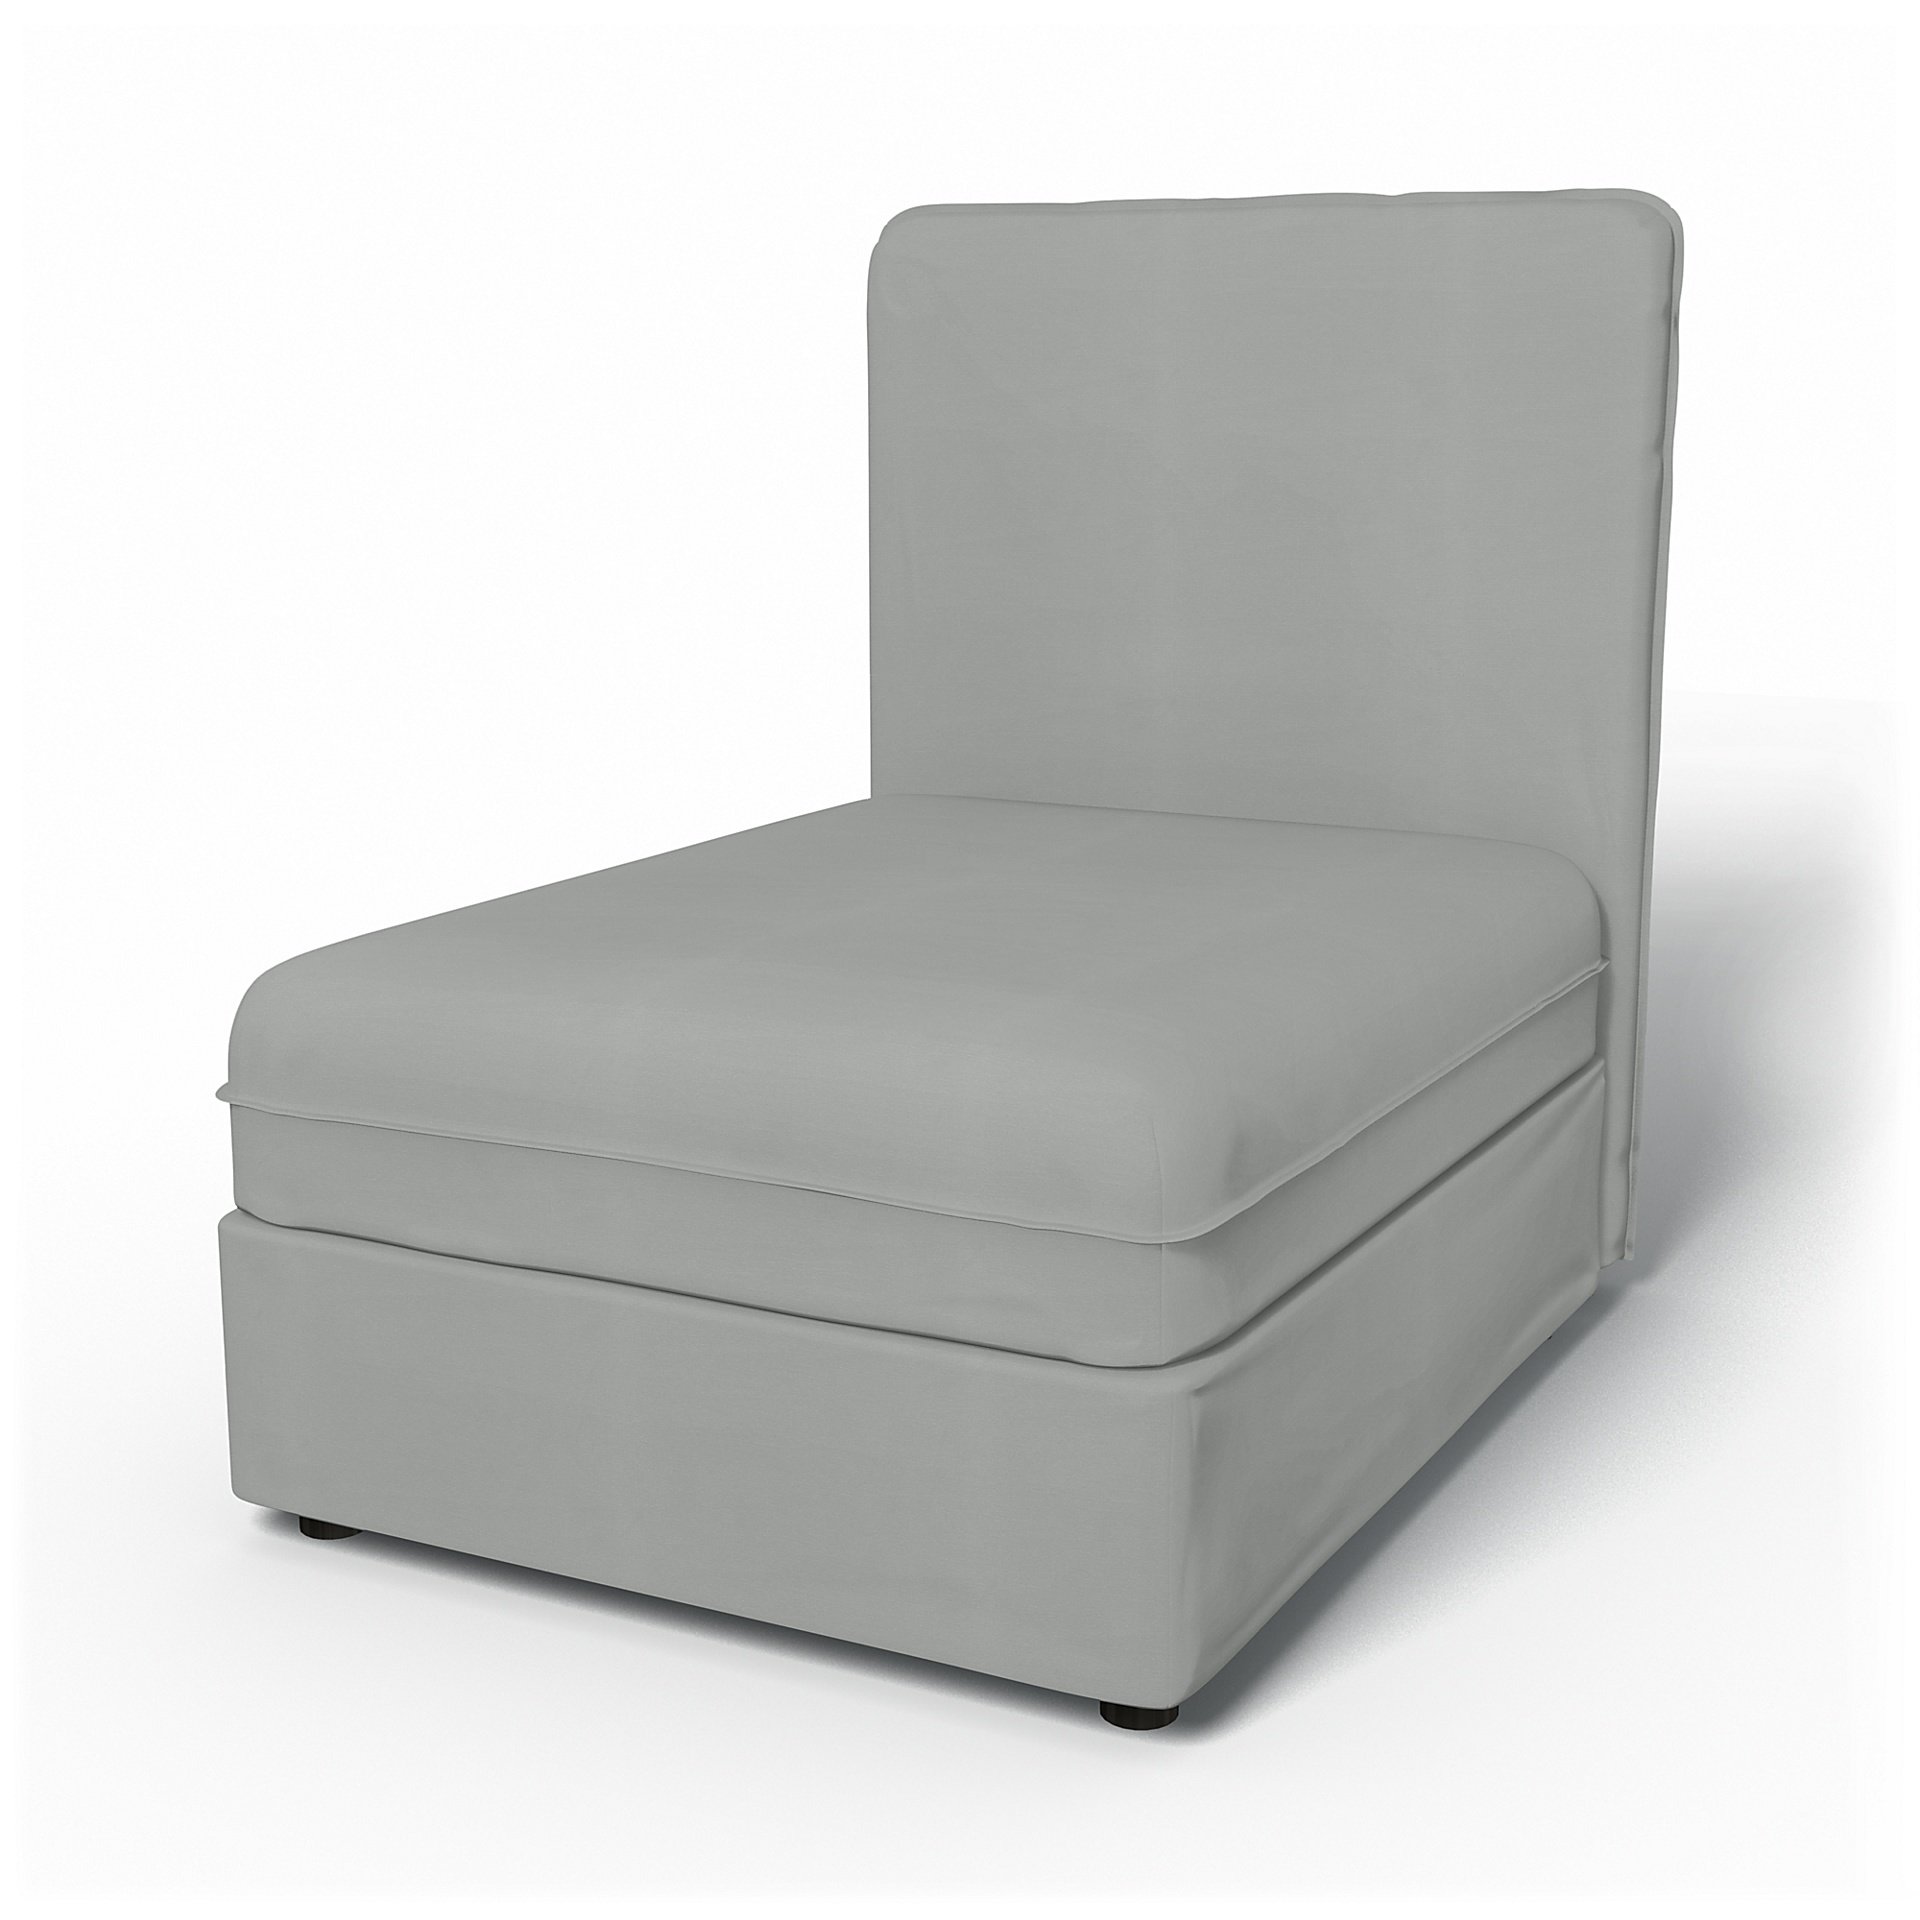 IKEA - Vallentuna Seat Module with High Back Cover 80x100cm 32x32in, Silver Grey, Cotton - Bemz